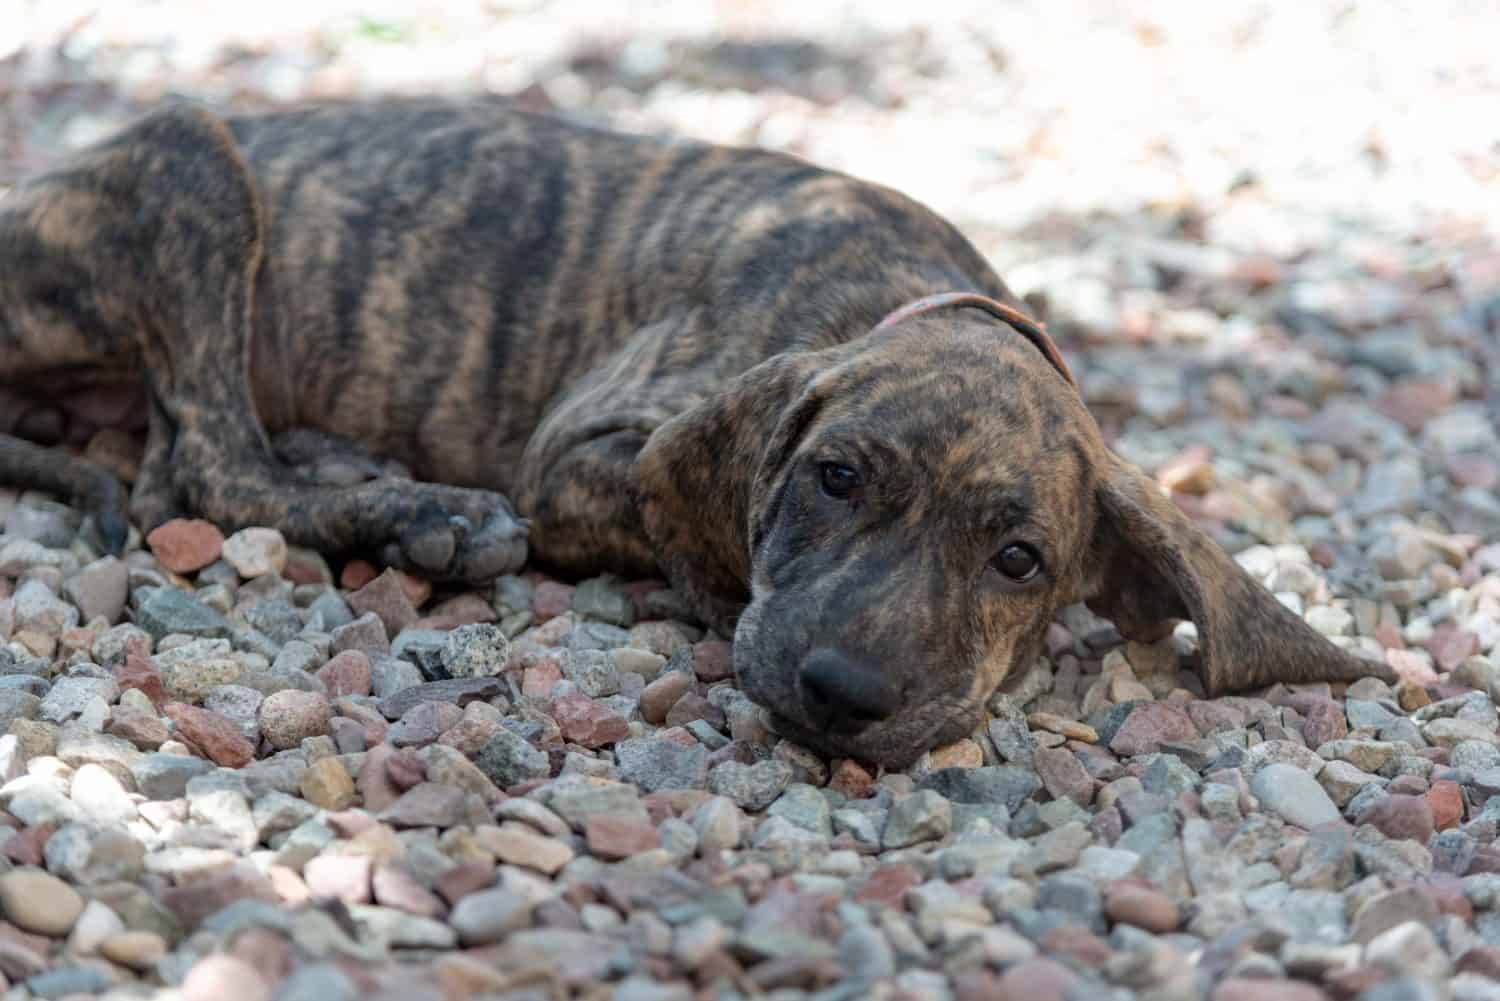 Plott Hound Dog Puppy Rescued from Texas Arrive at Colorado Animal Shelter Looking for Adoption and a Forever Home